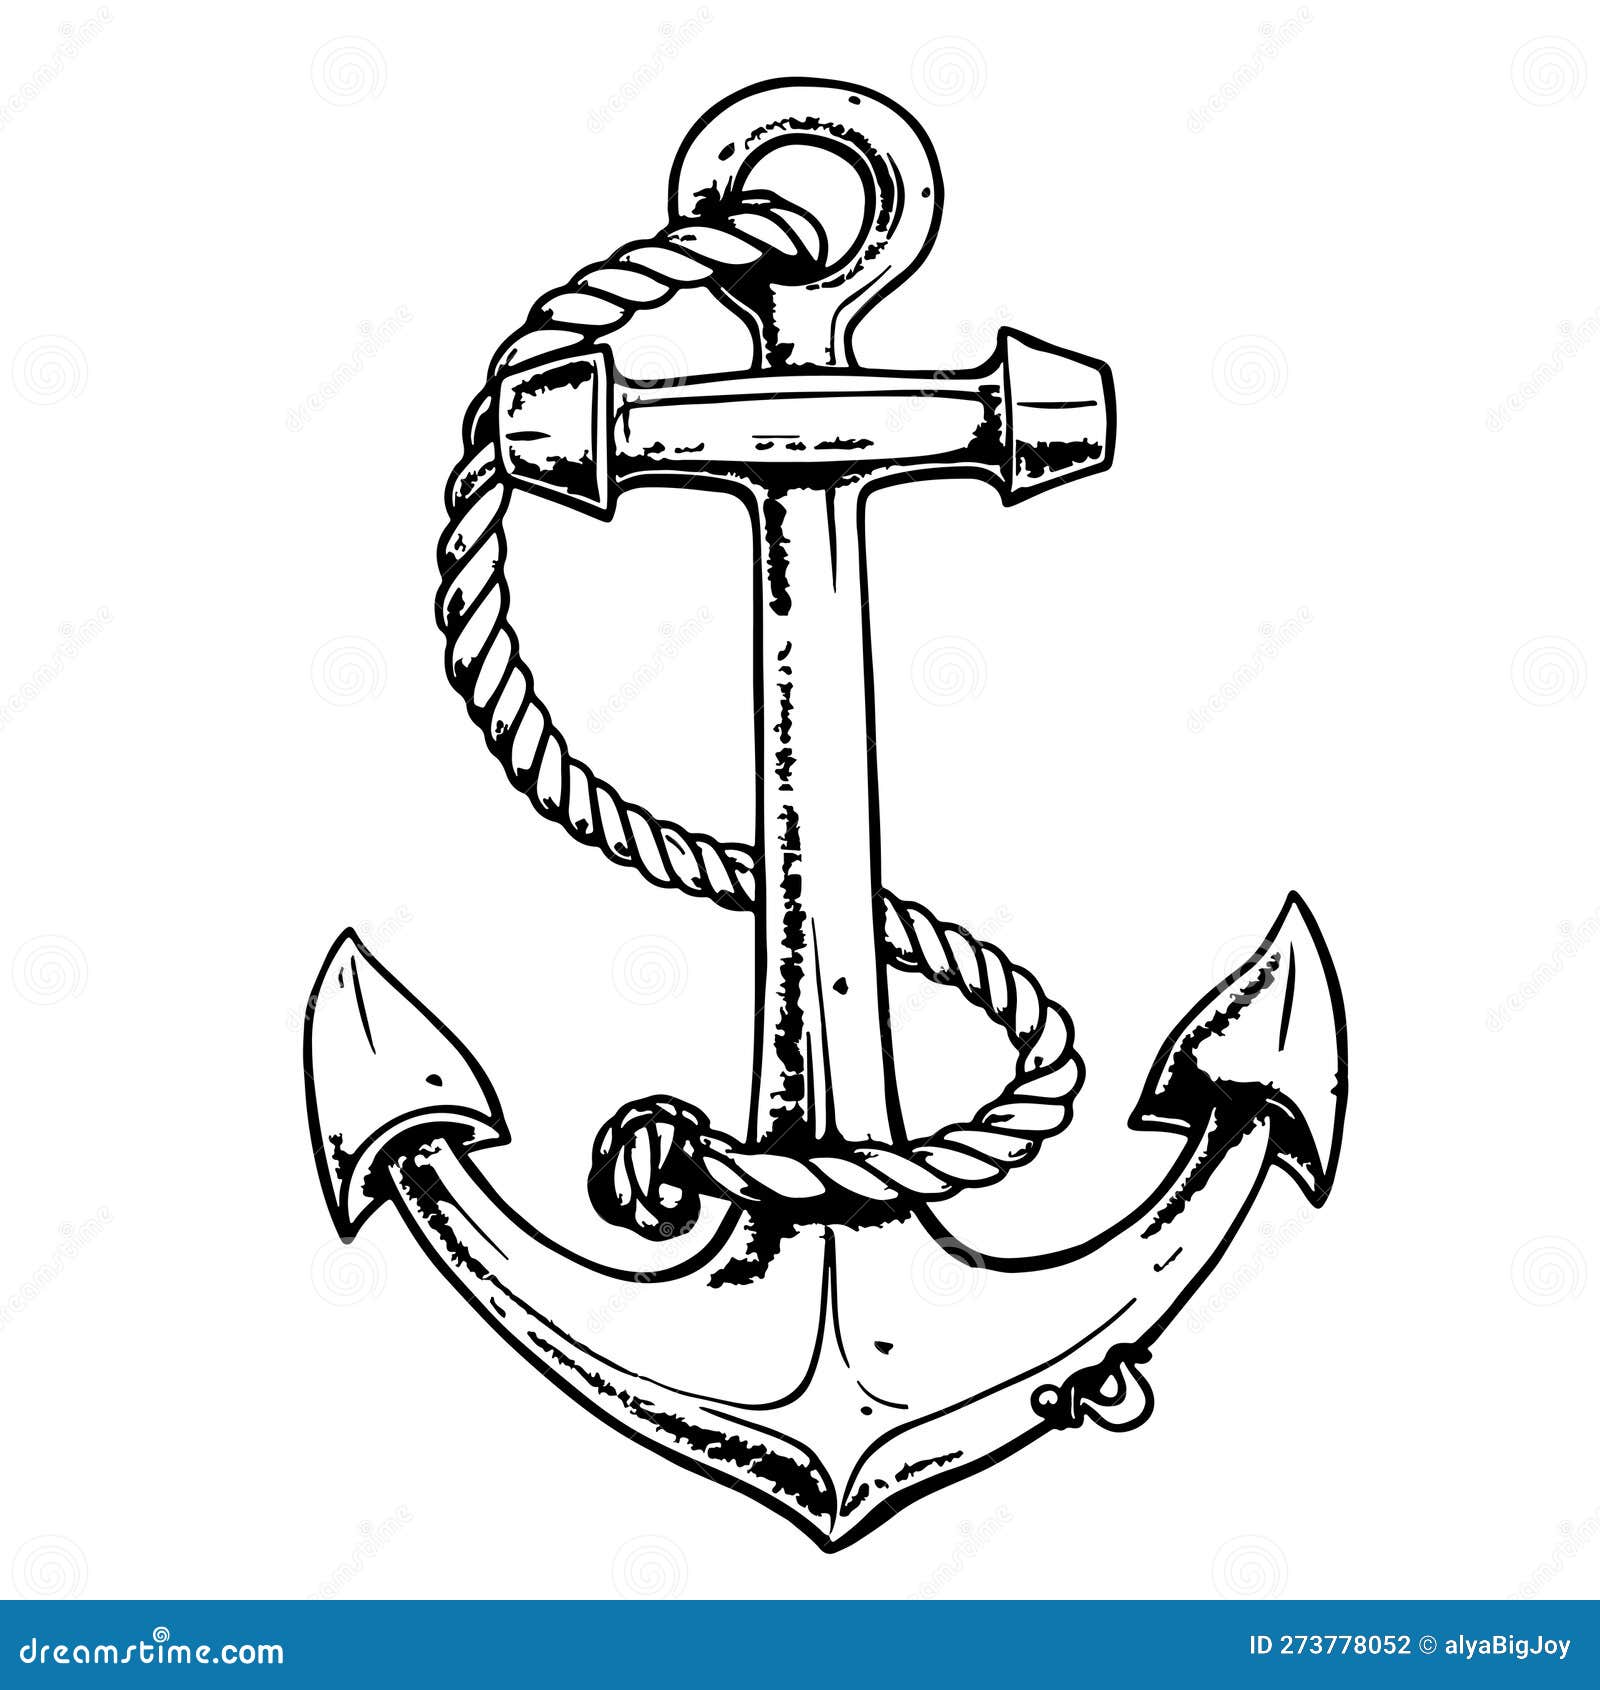 Anchor with Rope Hand Drawn Sketch Vector Illustration Stock Vector ...